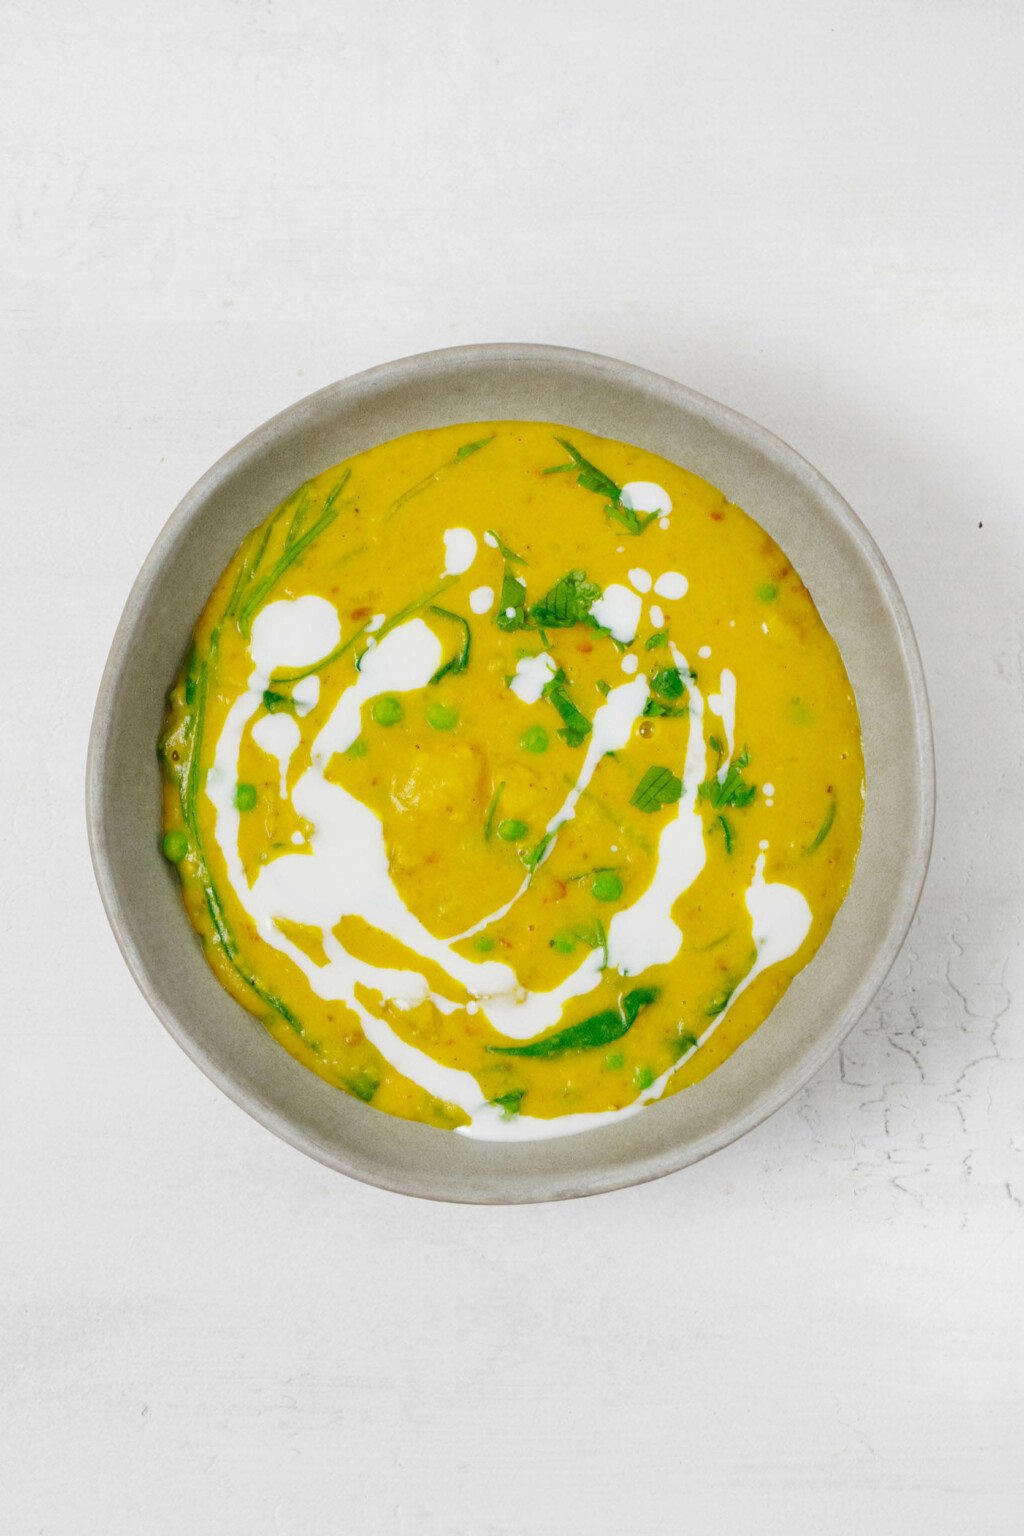 An overhead image of a gray, ceramic bowl that's filled with a golden colored, plant-based soup.